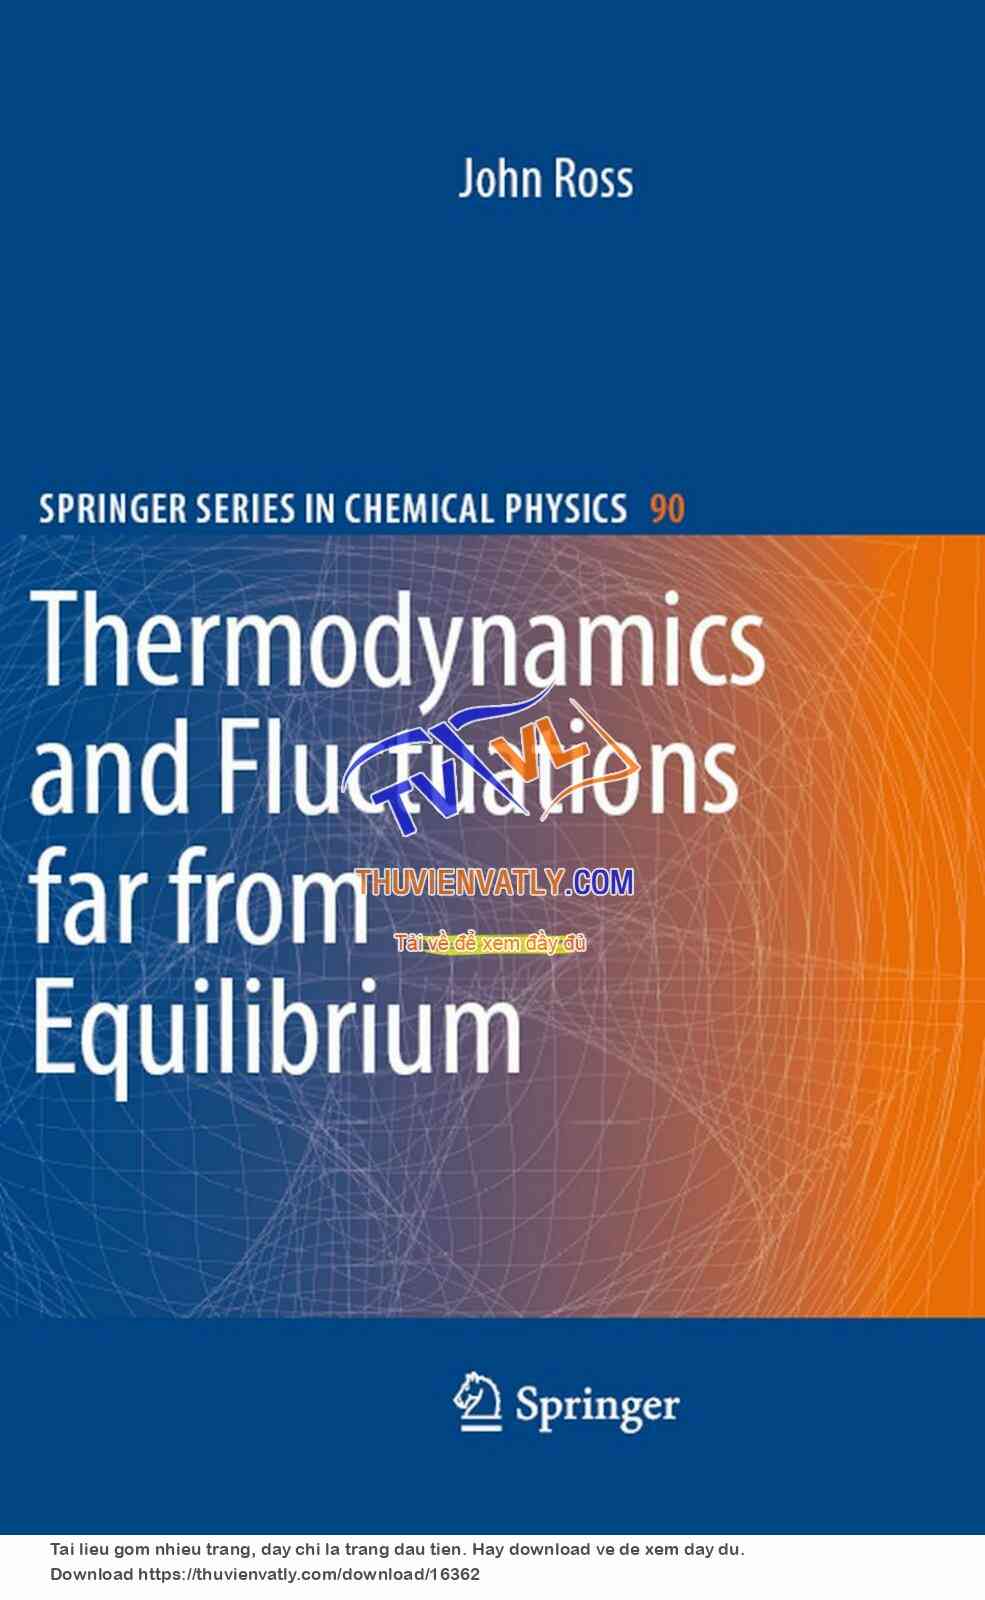 Thermodynamics and Fluctuations far from Equilibrium (John Ross, Springer 2008)